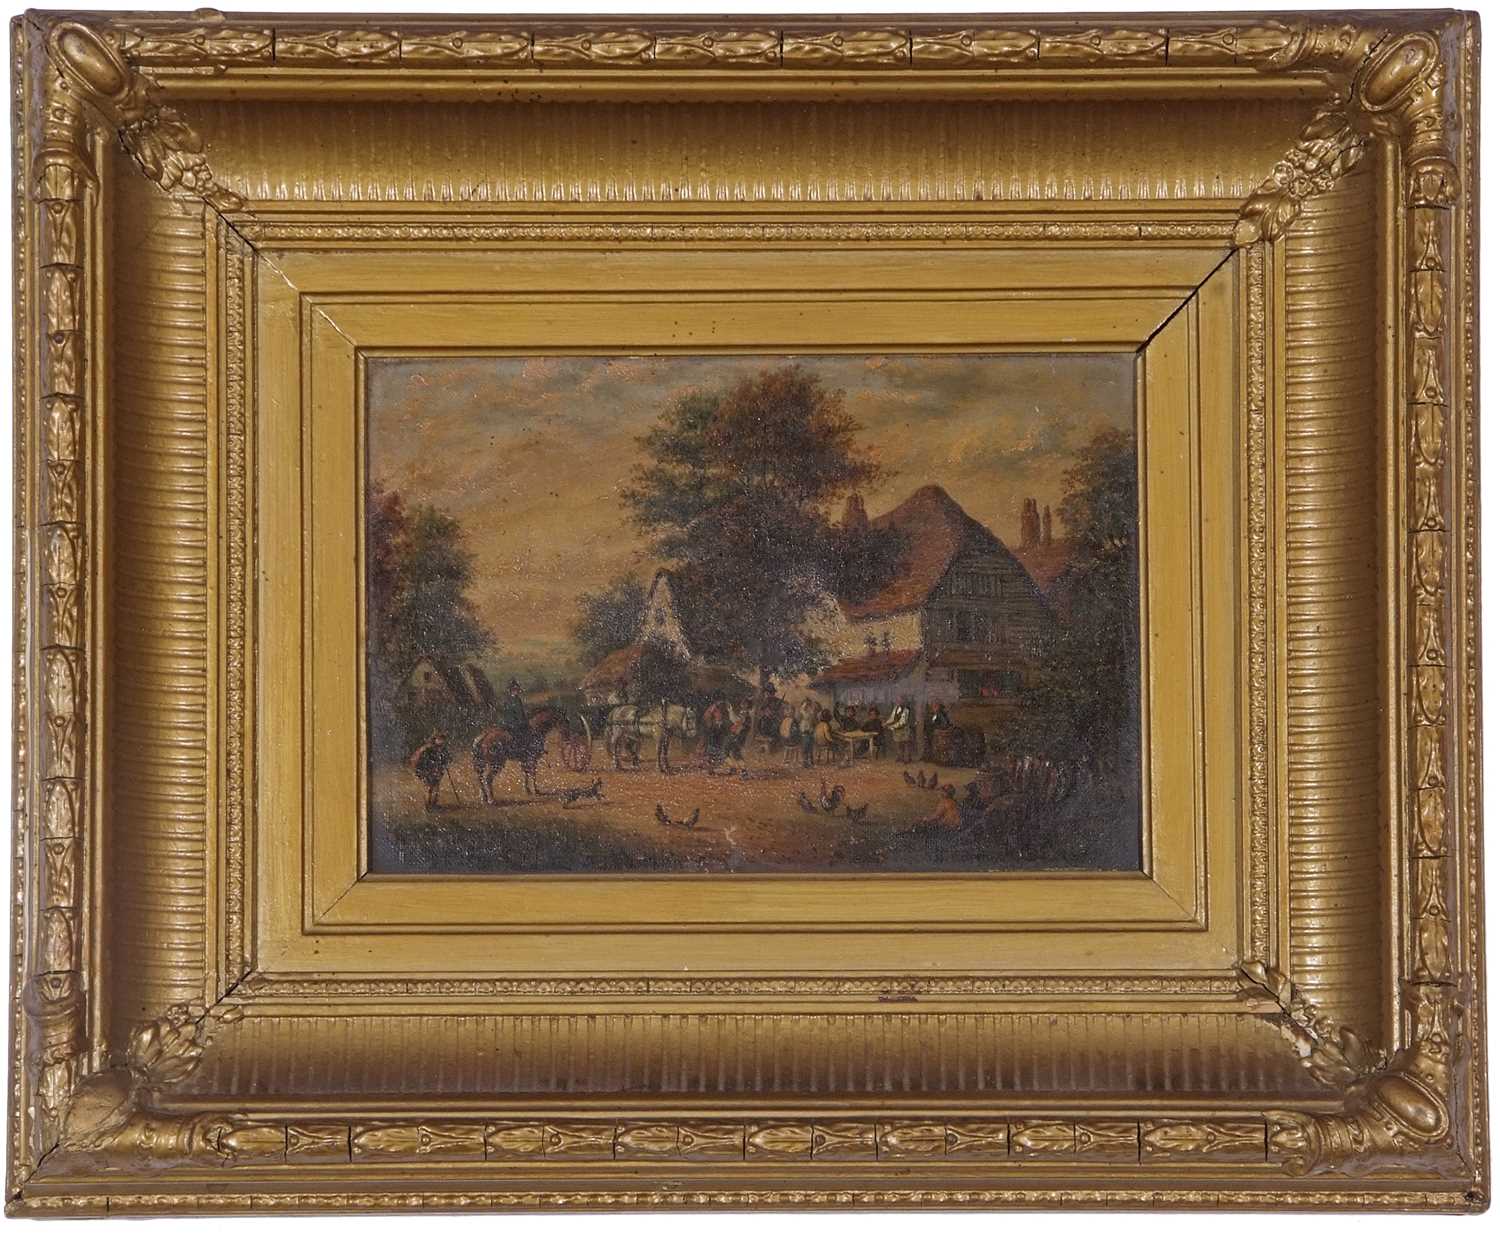 19th Century rural scene with merrymaking and dancing outside a tavern, opposite new arrivals on